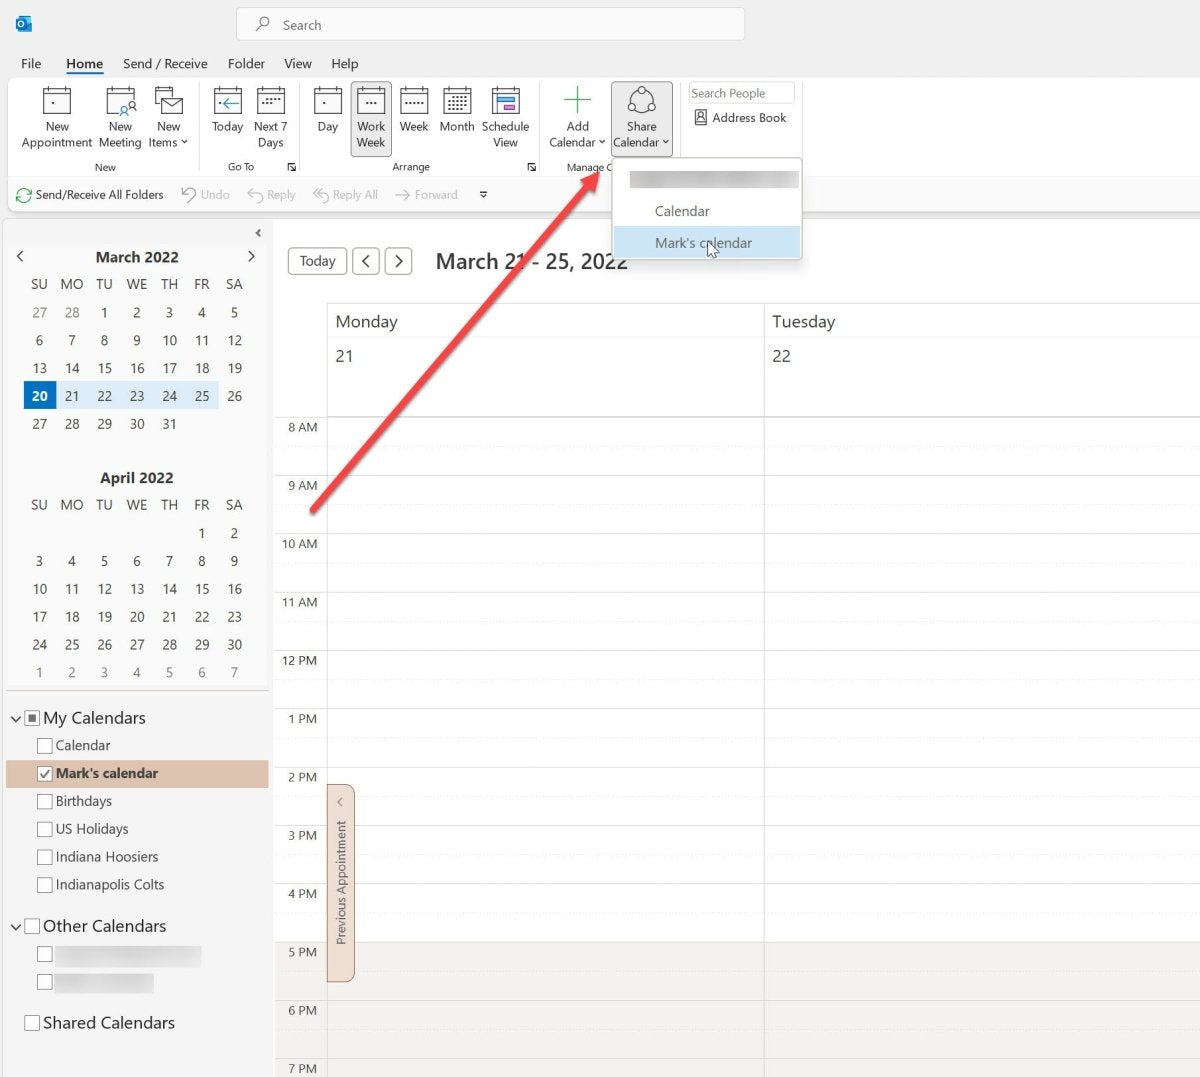 How to Share Calendars in Outlook? - keysdirect.us